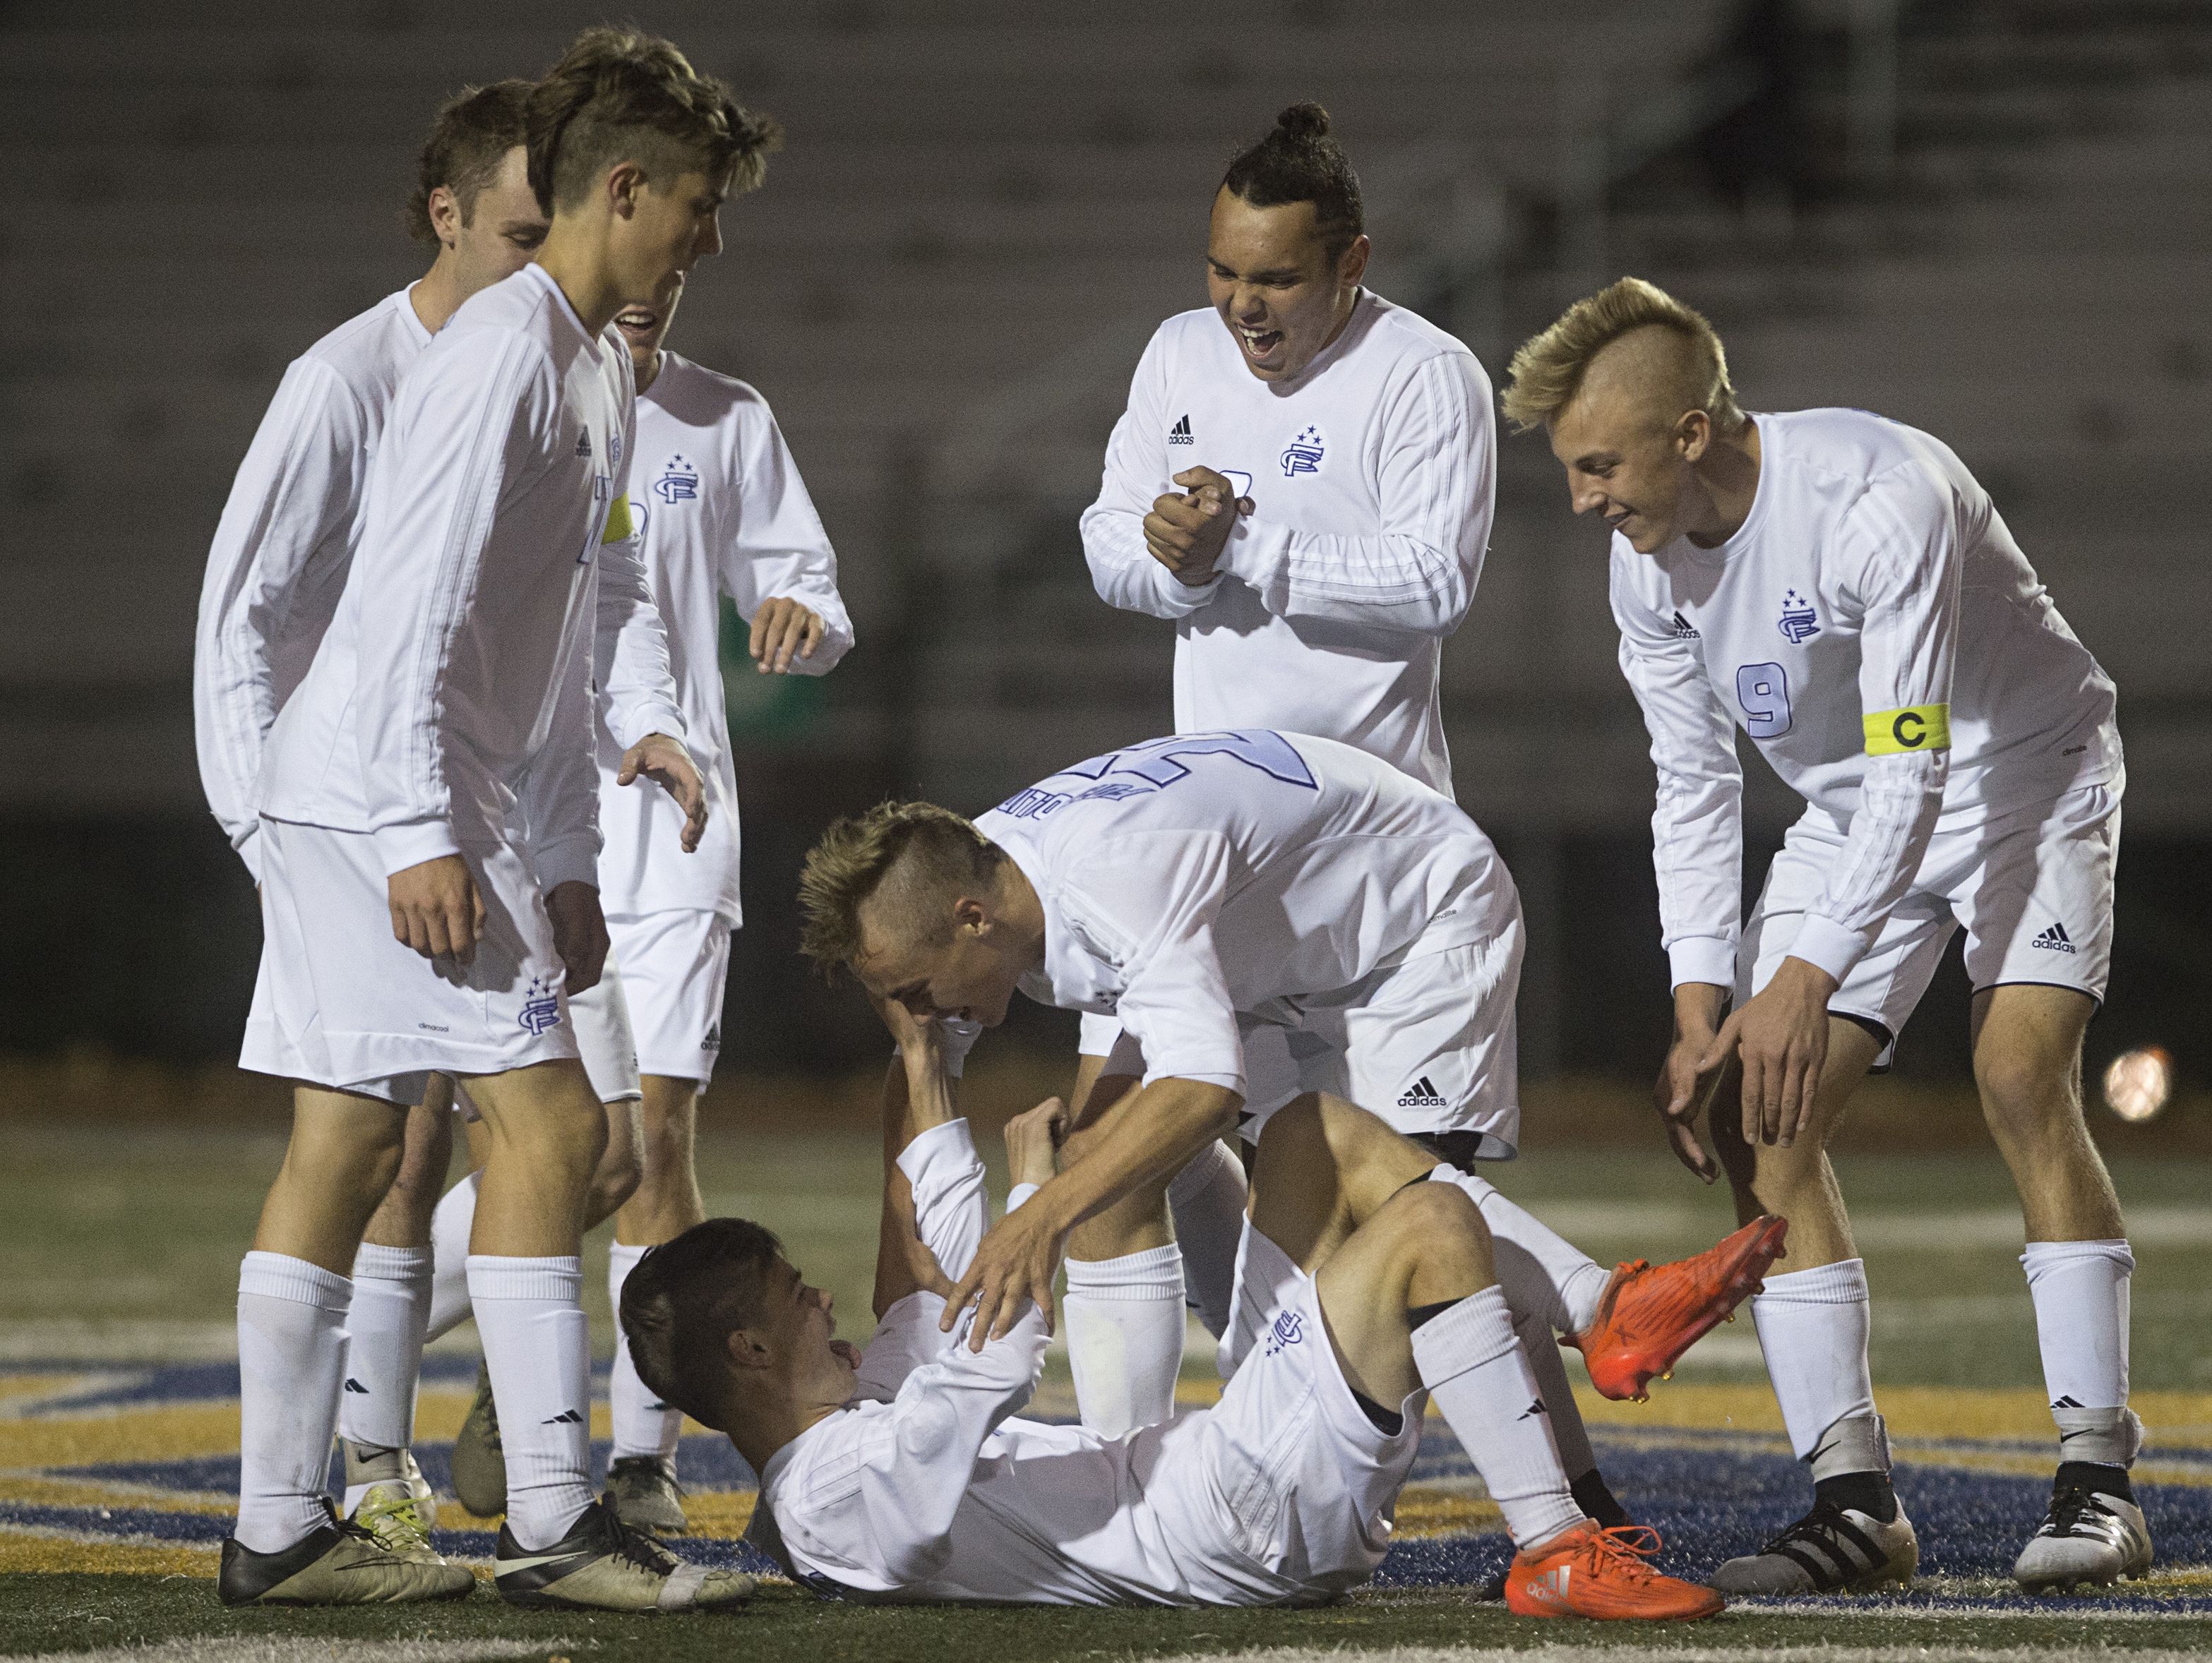 Fort Collins High School celebrates a goal from Logan Katzman during a game against Pine Creek at French Field Wednesday. The Lambkins would go on to win 2-1 and advance to quarterfinals.